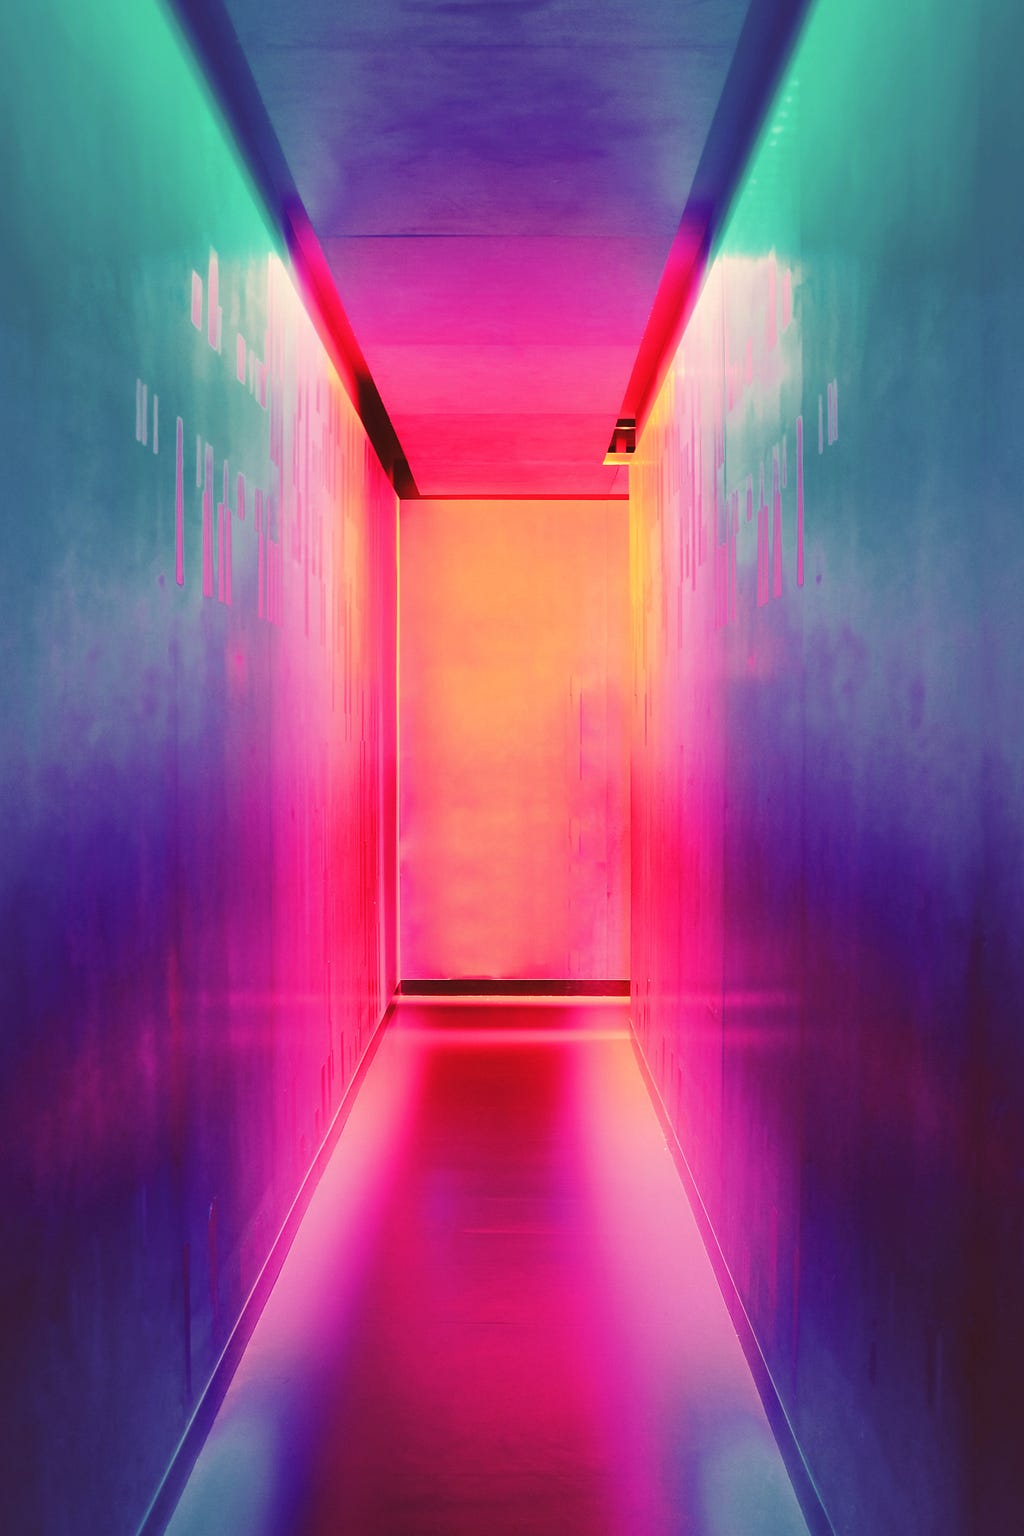 A colourful pathway leading towards a door and/or end of a hallway.